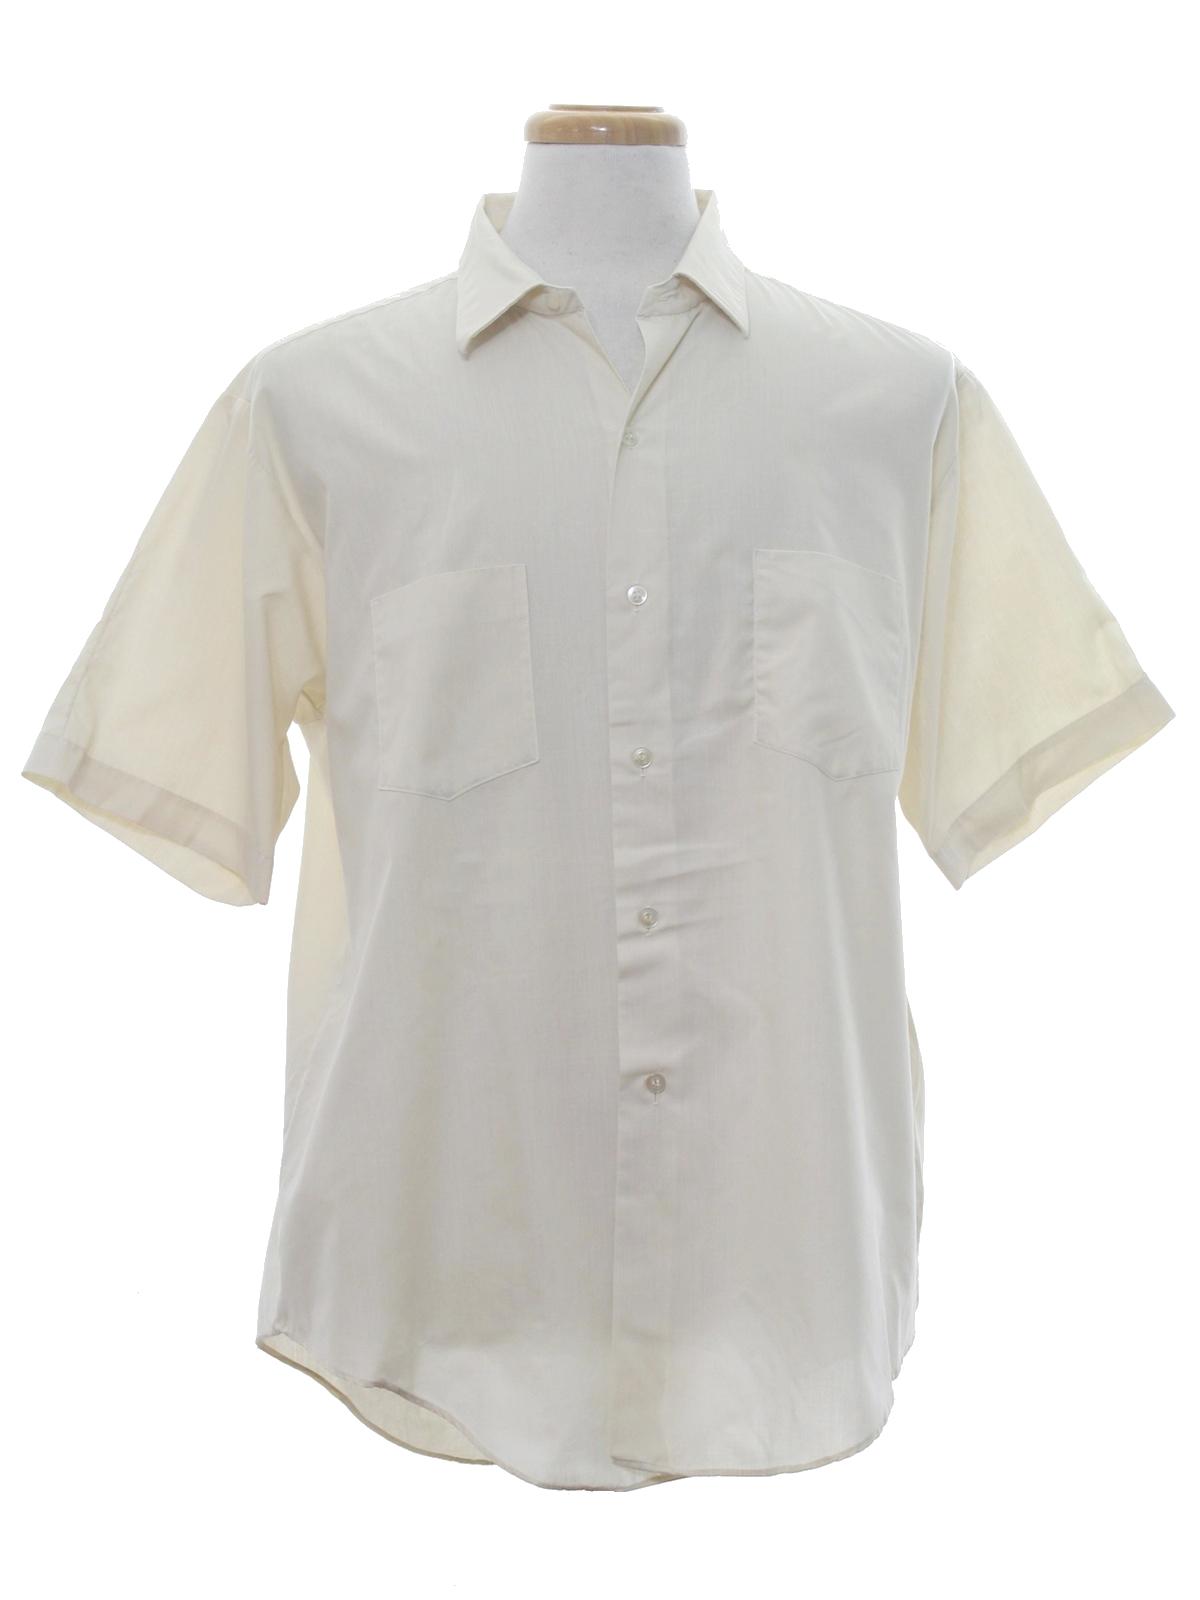 Vintage 1960's Shirt: 60s -Sire- Mens winter white background polyester ...